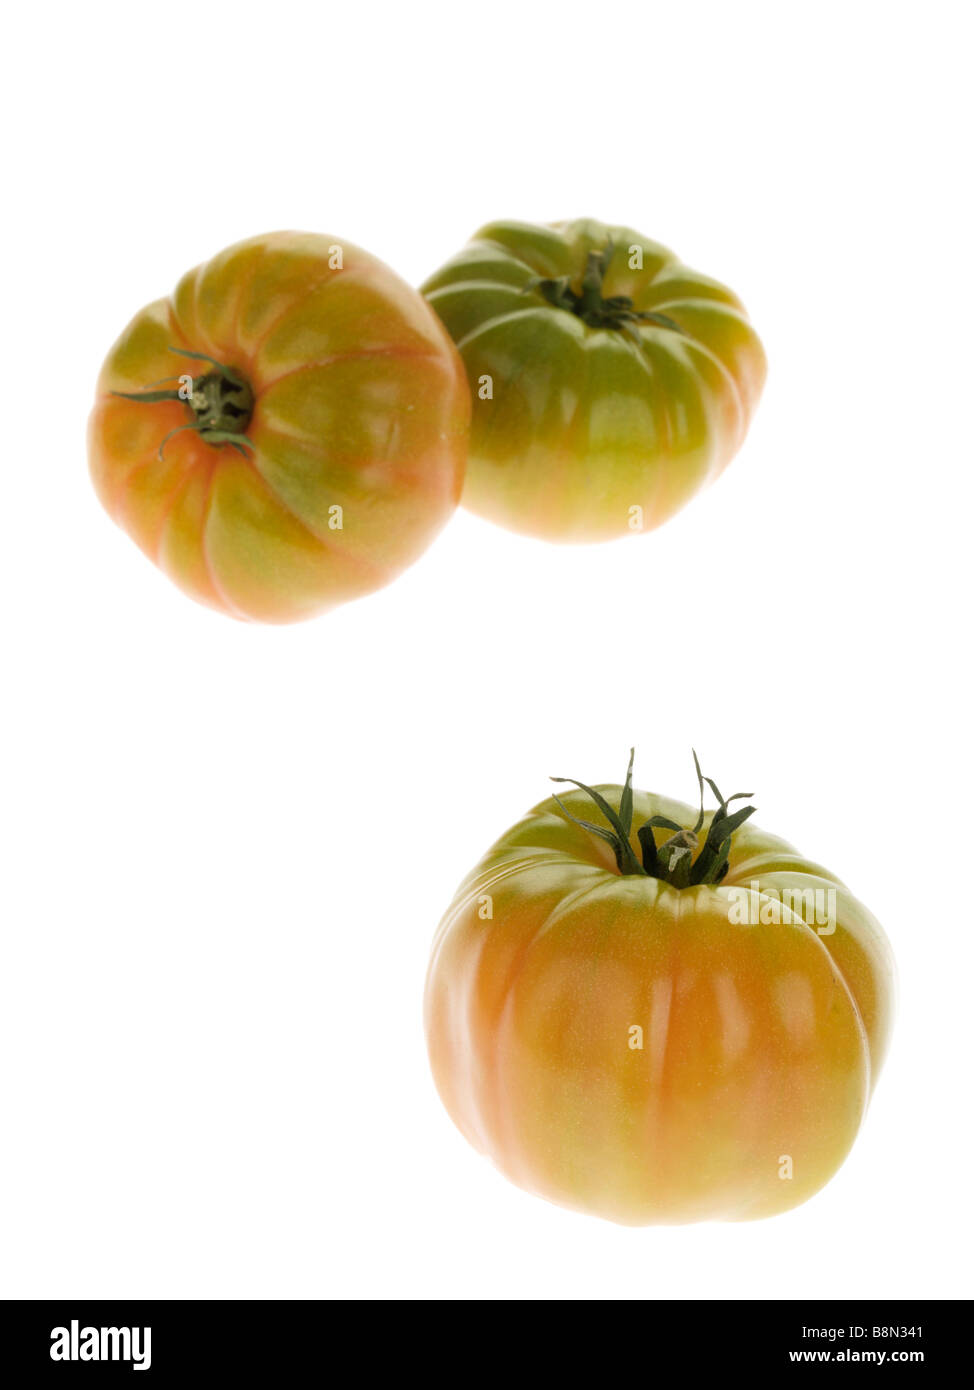 Fresh Ripe Large Marmande Green Tomatoes Isolated Against A White Background With No People And A Clipping Path Stock Photo